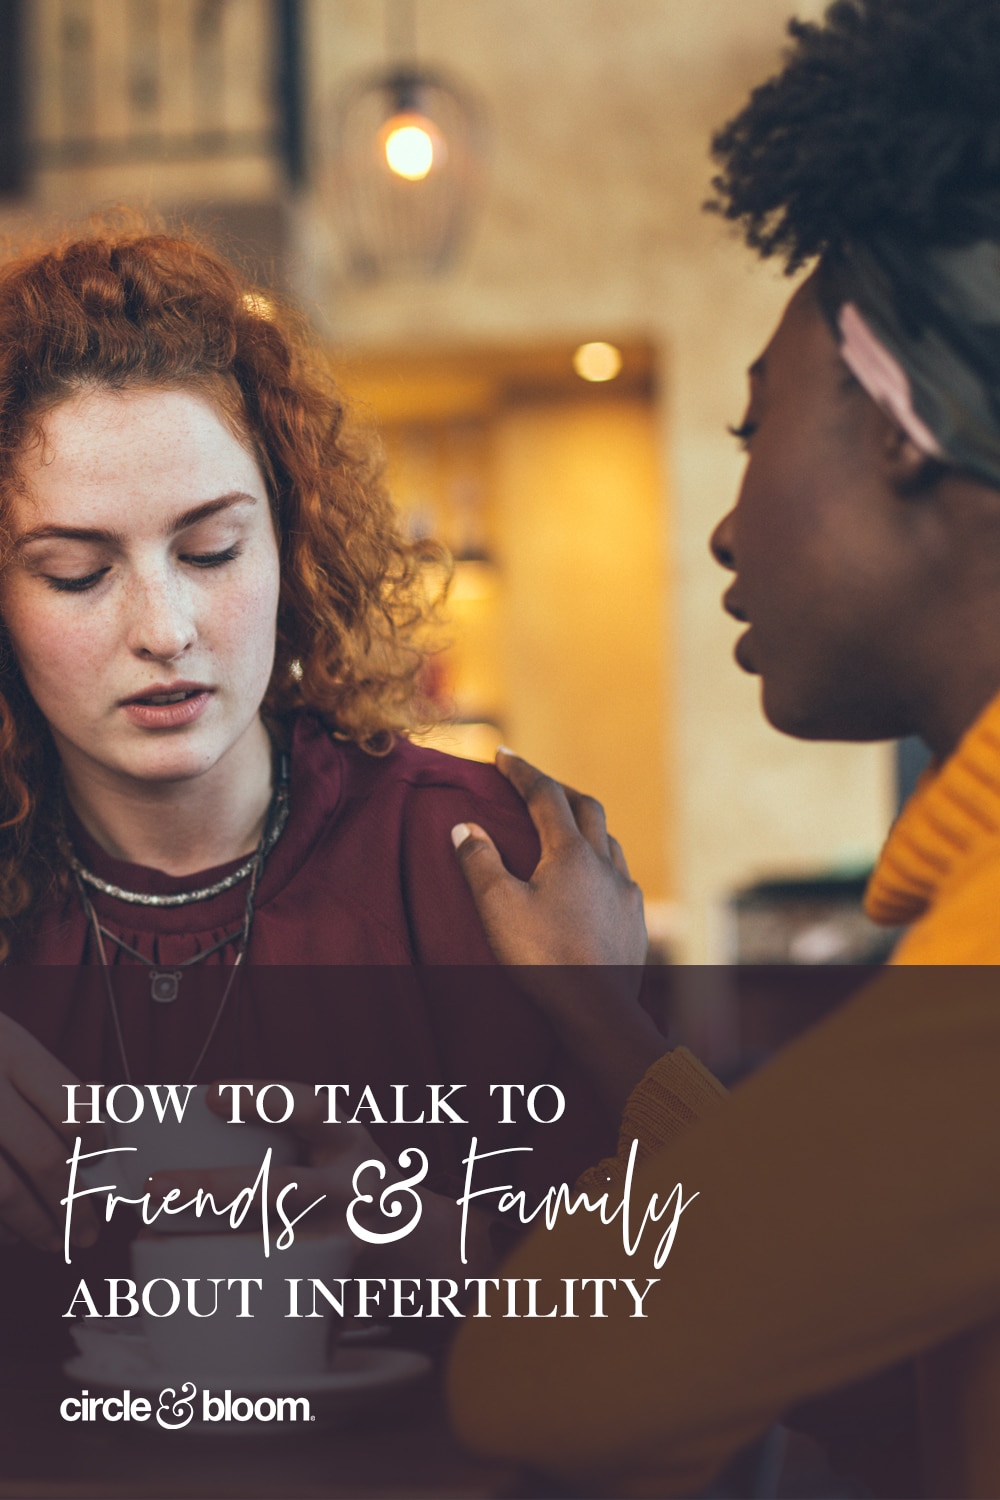 How To Talk to Family & Friends About Infertility